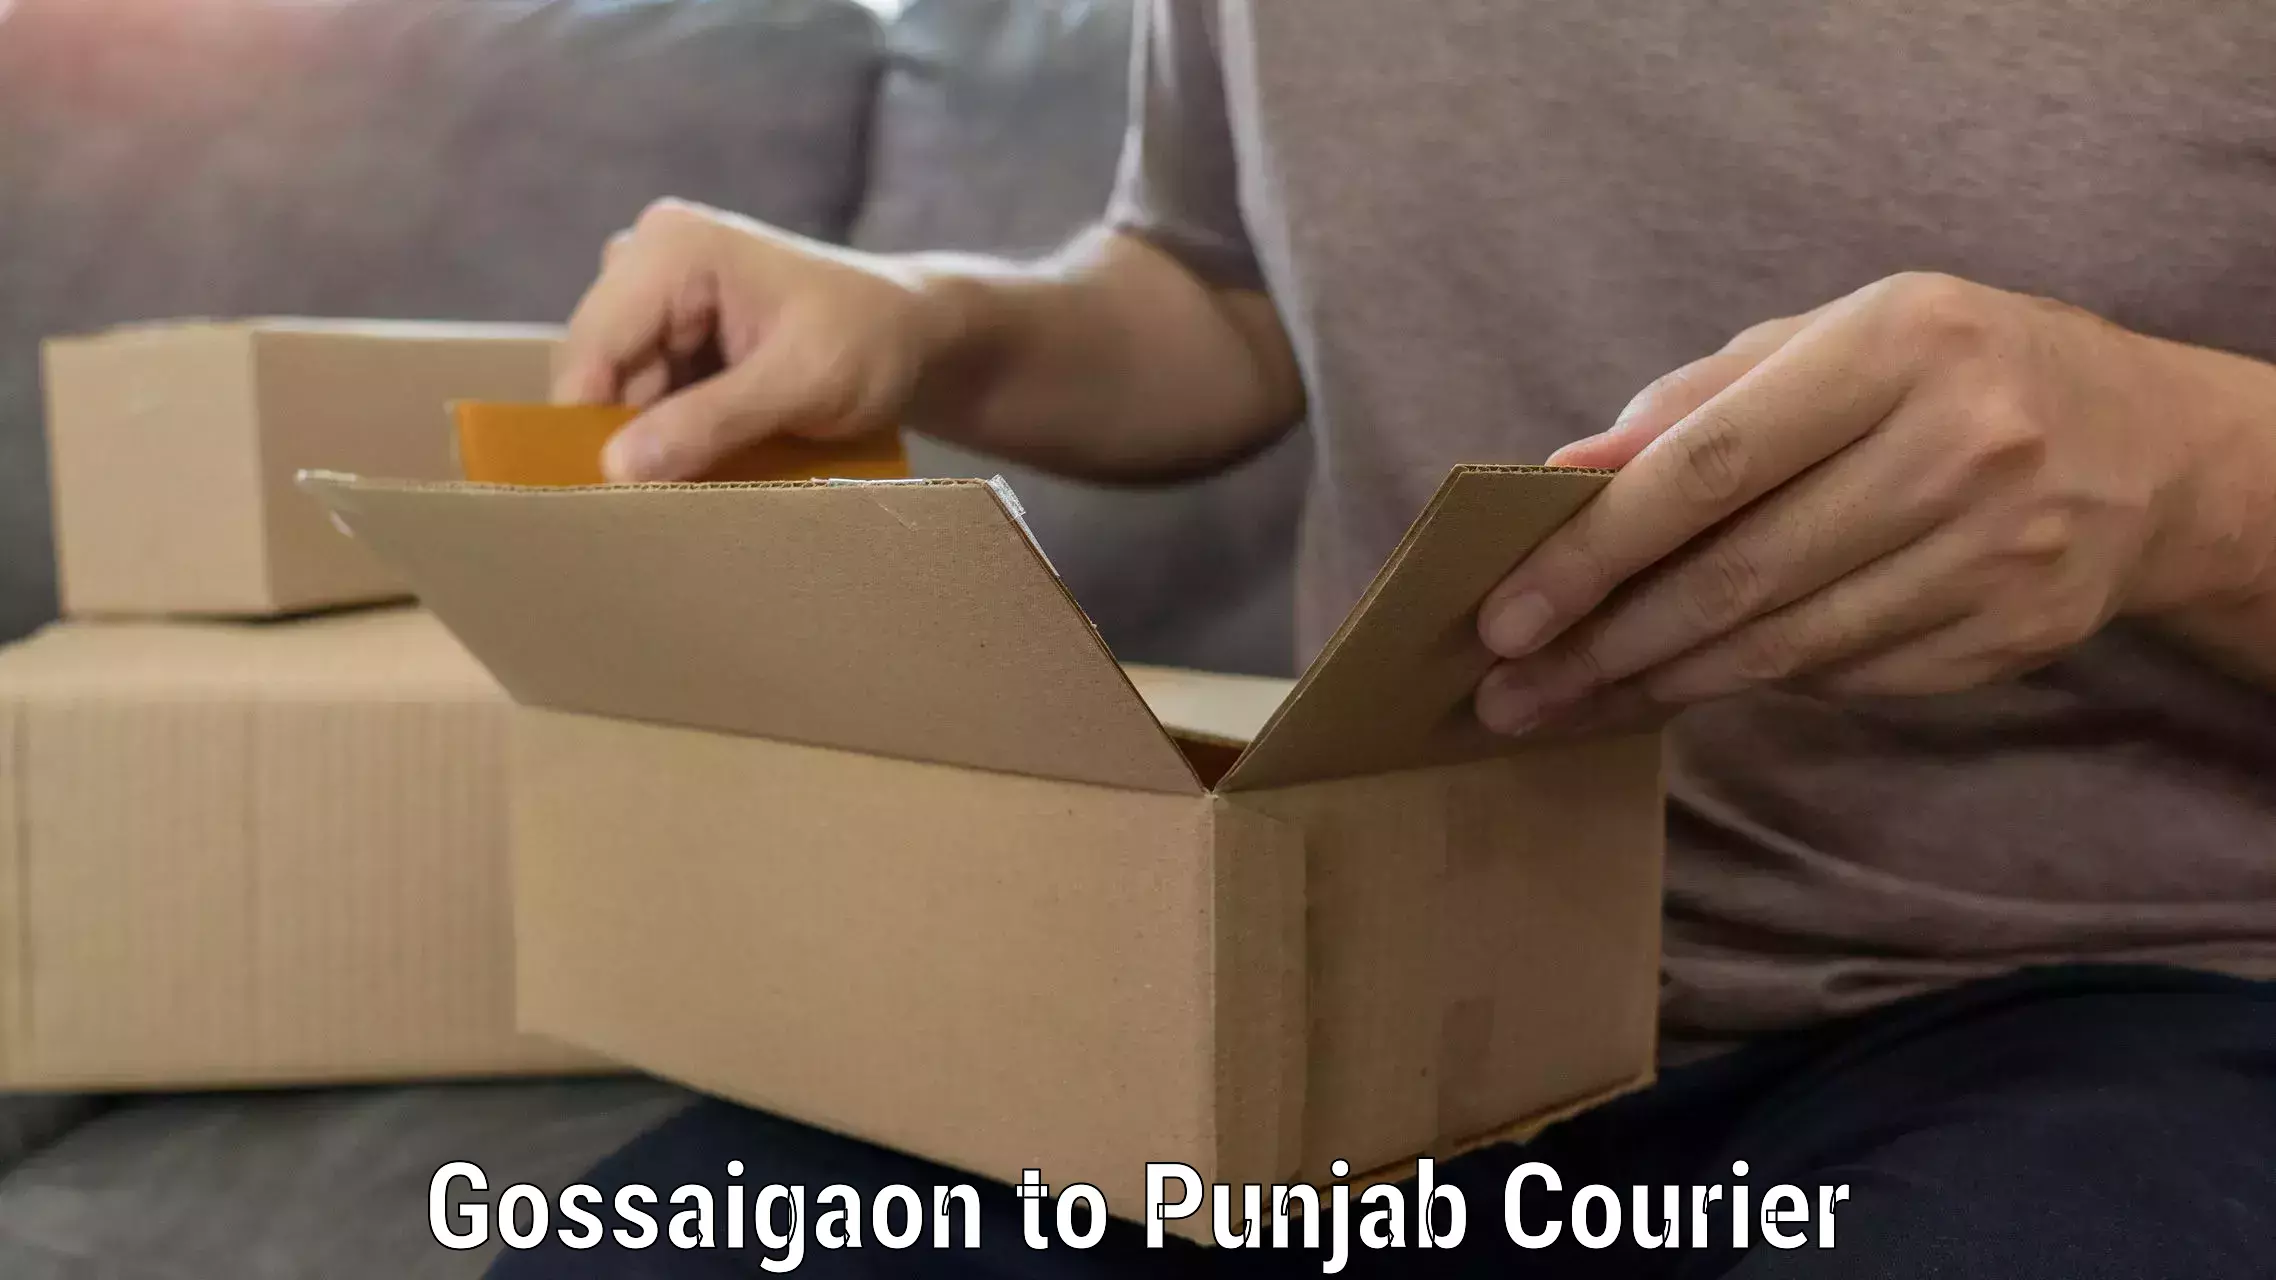 Dependable moving services Gossaigaon to Punjab